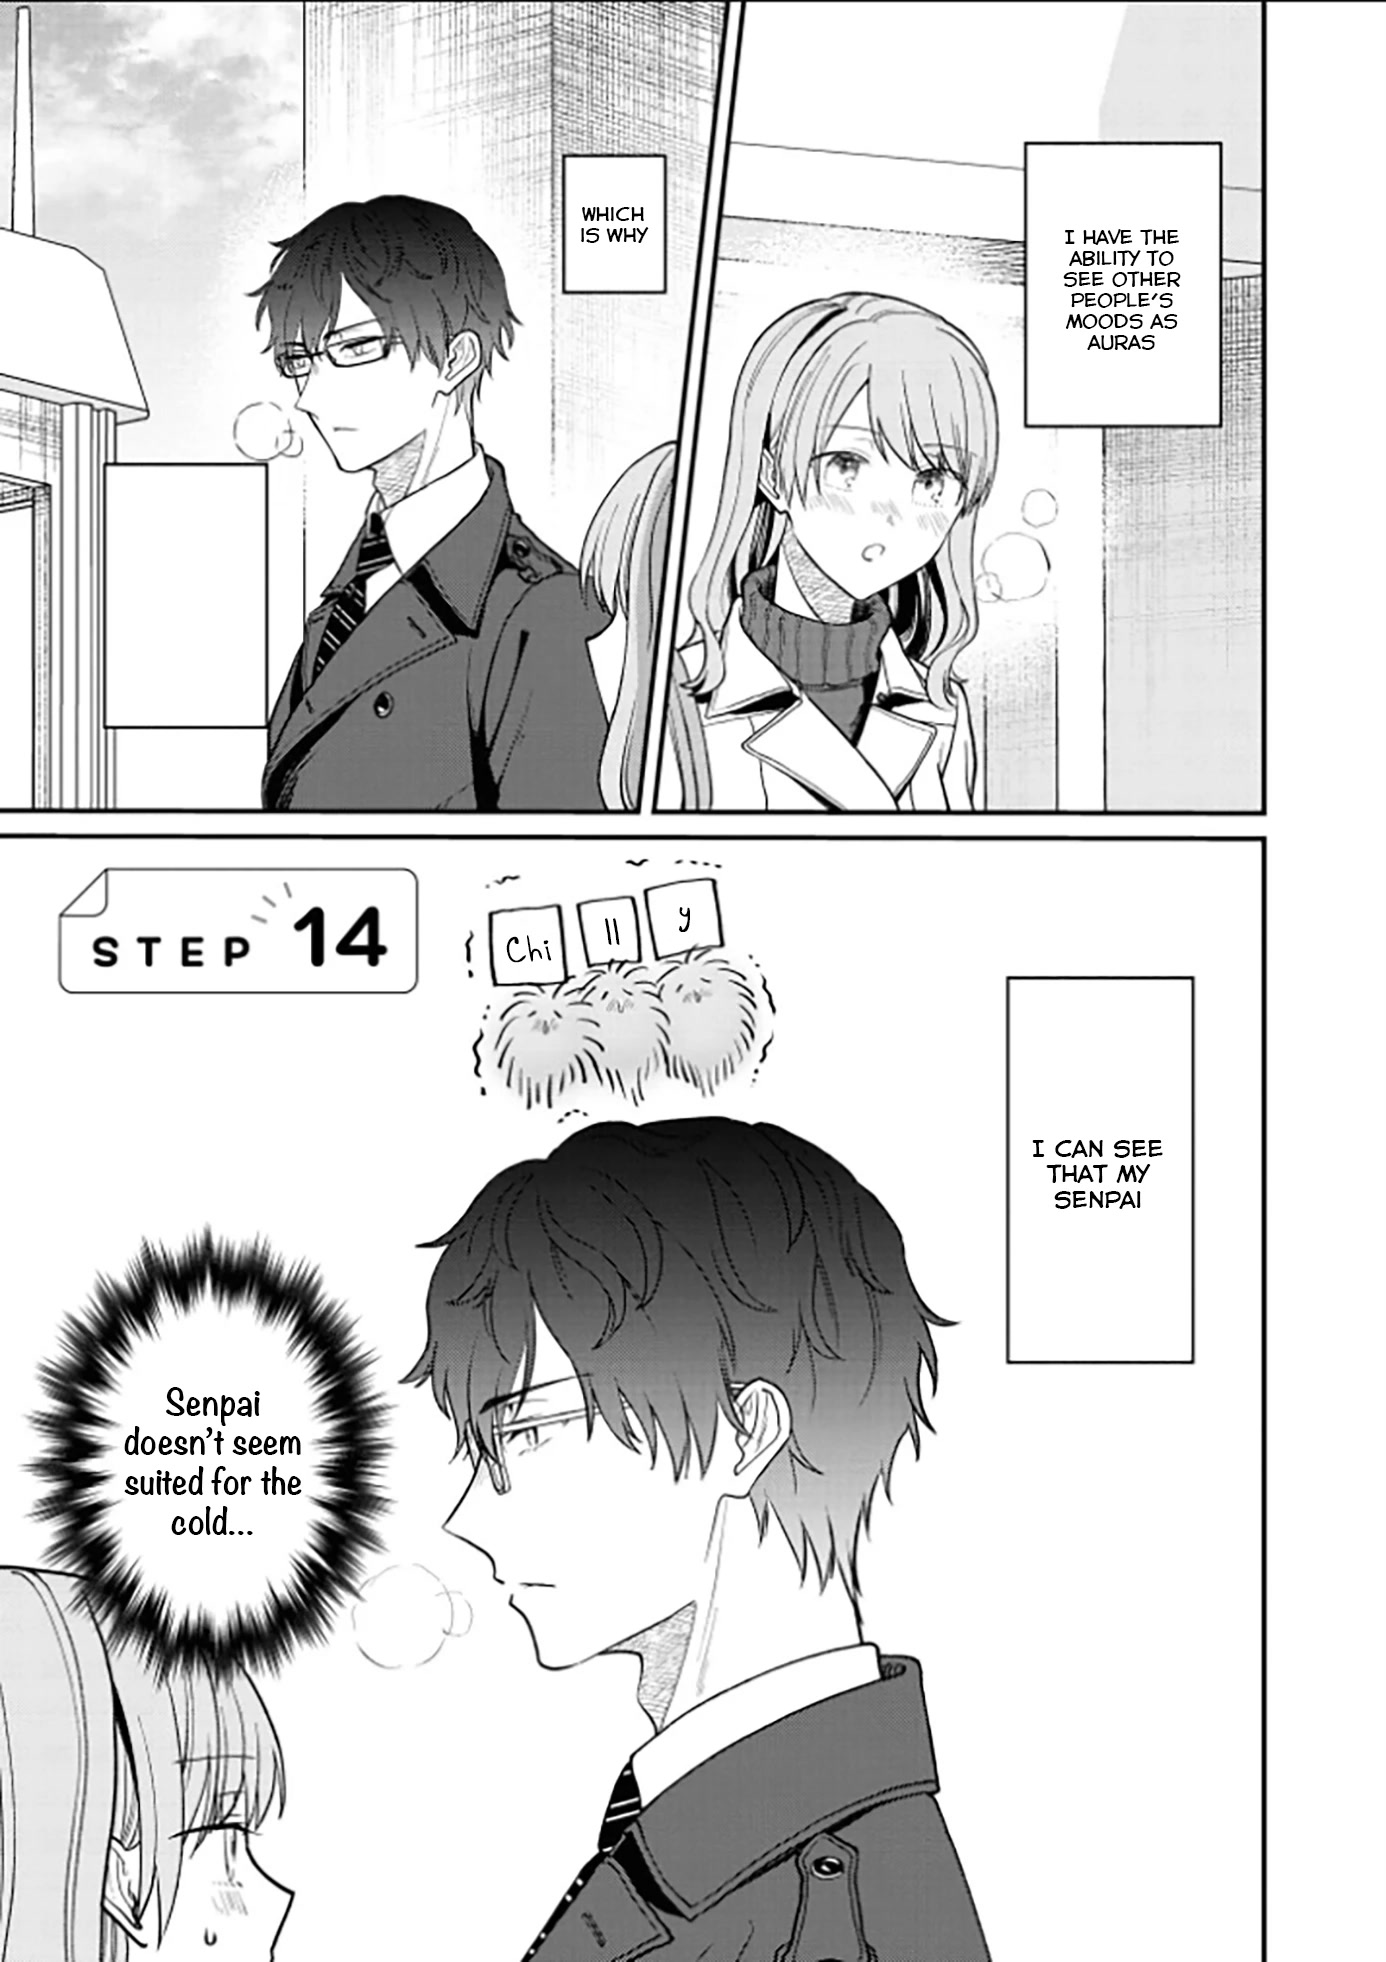 The New-Hire Who Could "Read" Emotions and the Unsociable Senpai - chapter 14 - #1